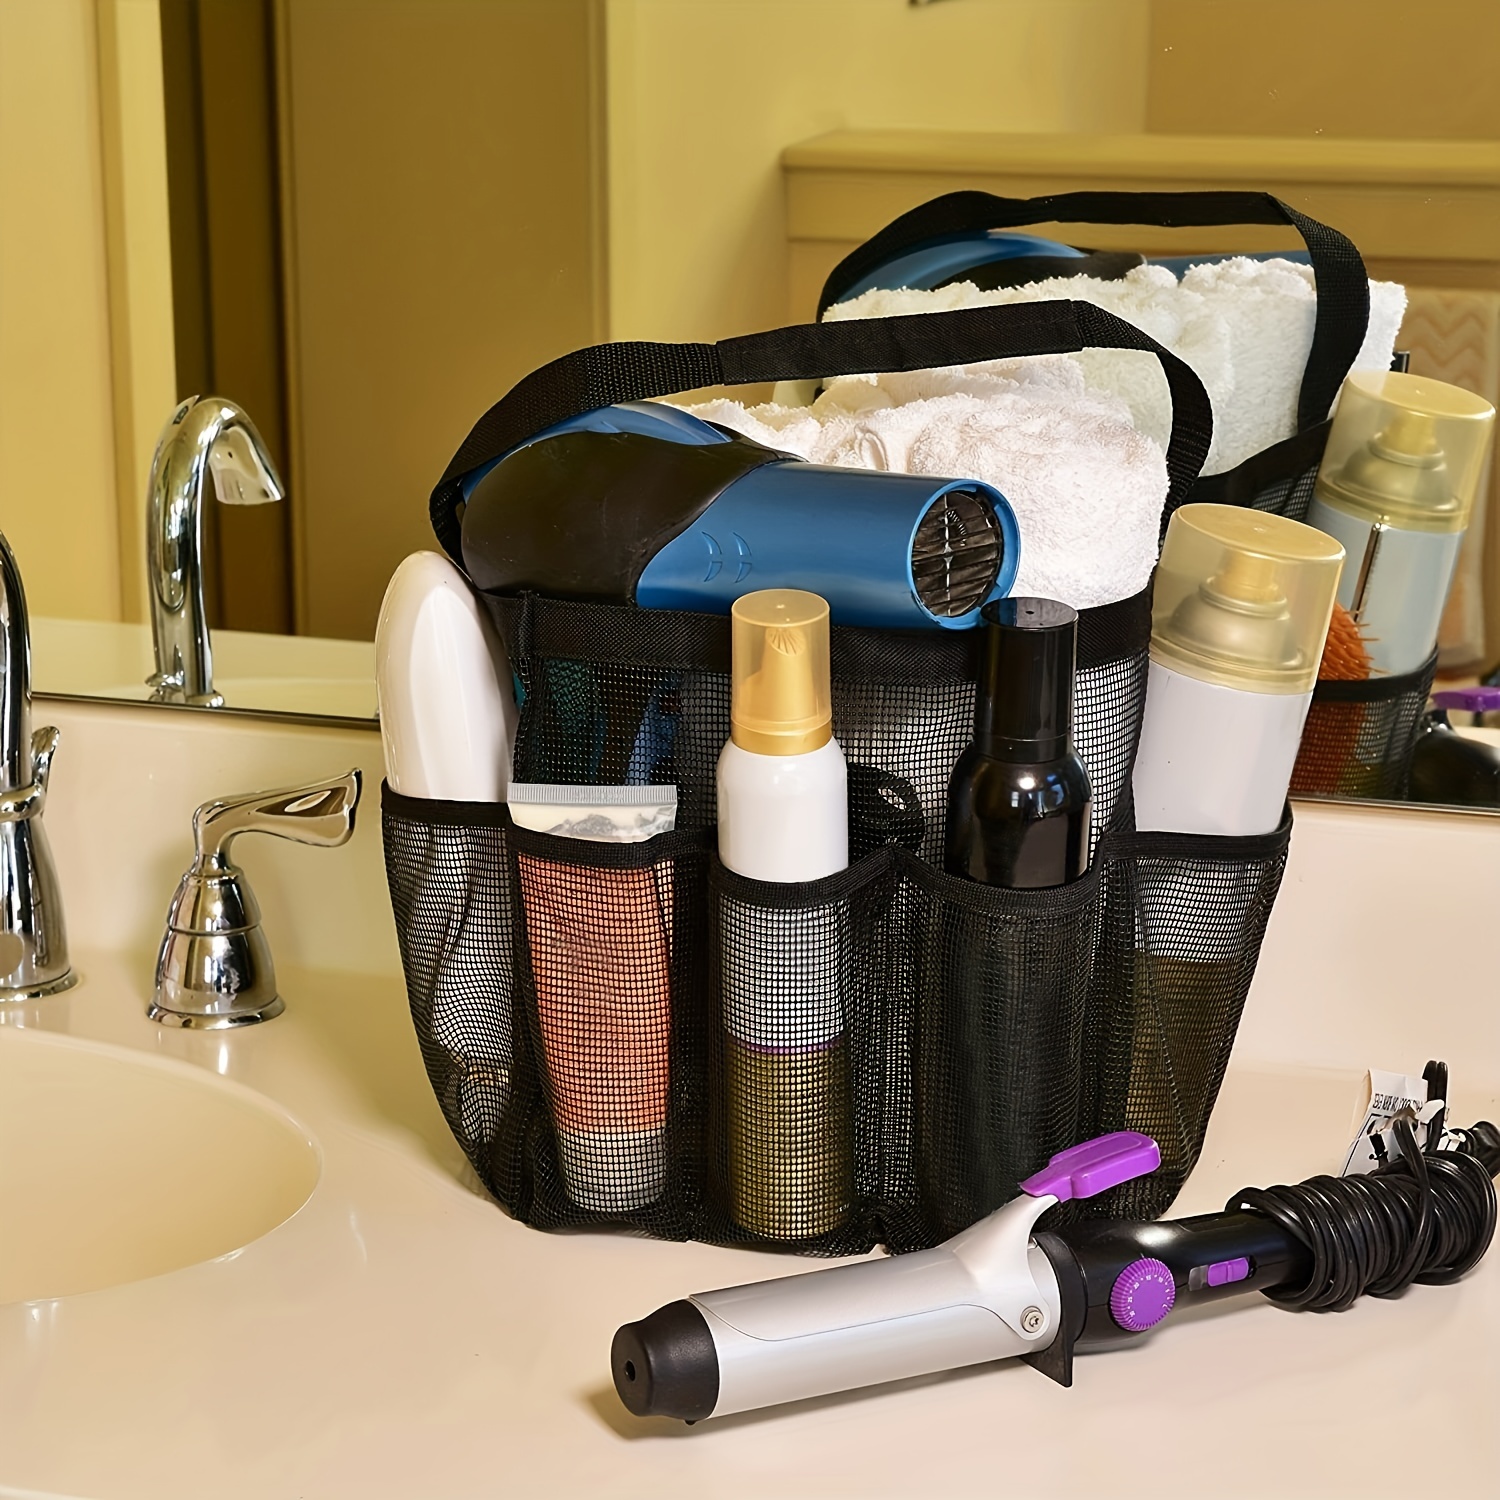 Guys Shower Dorm Caddy - The How-To Home